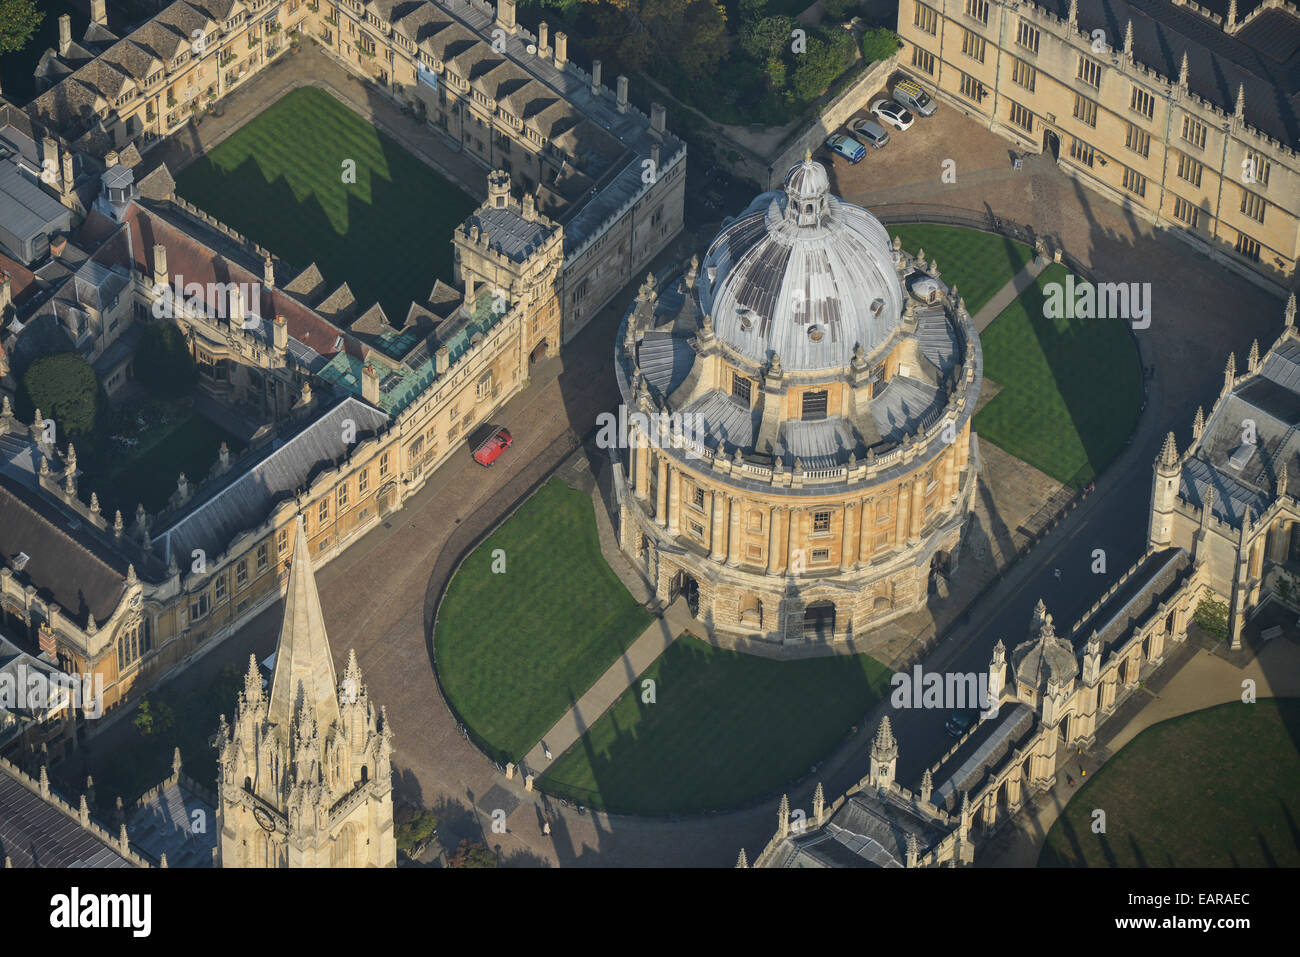 An aerial view of the Radcliffe Camera, a library at Oxford University Stock Photo